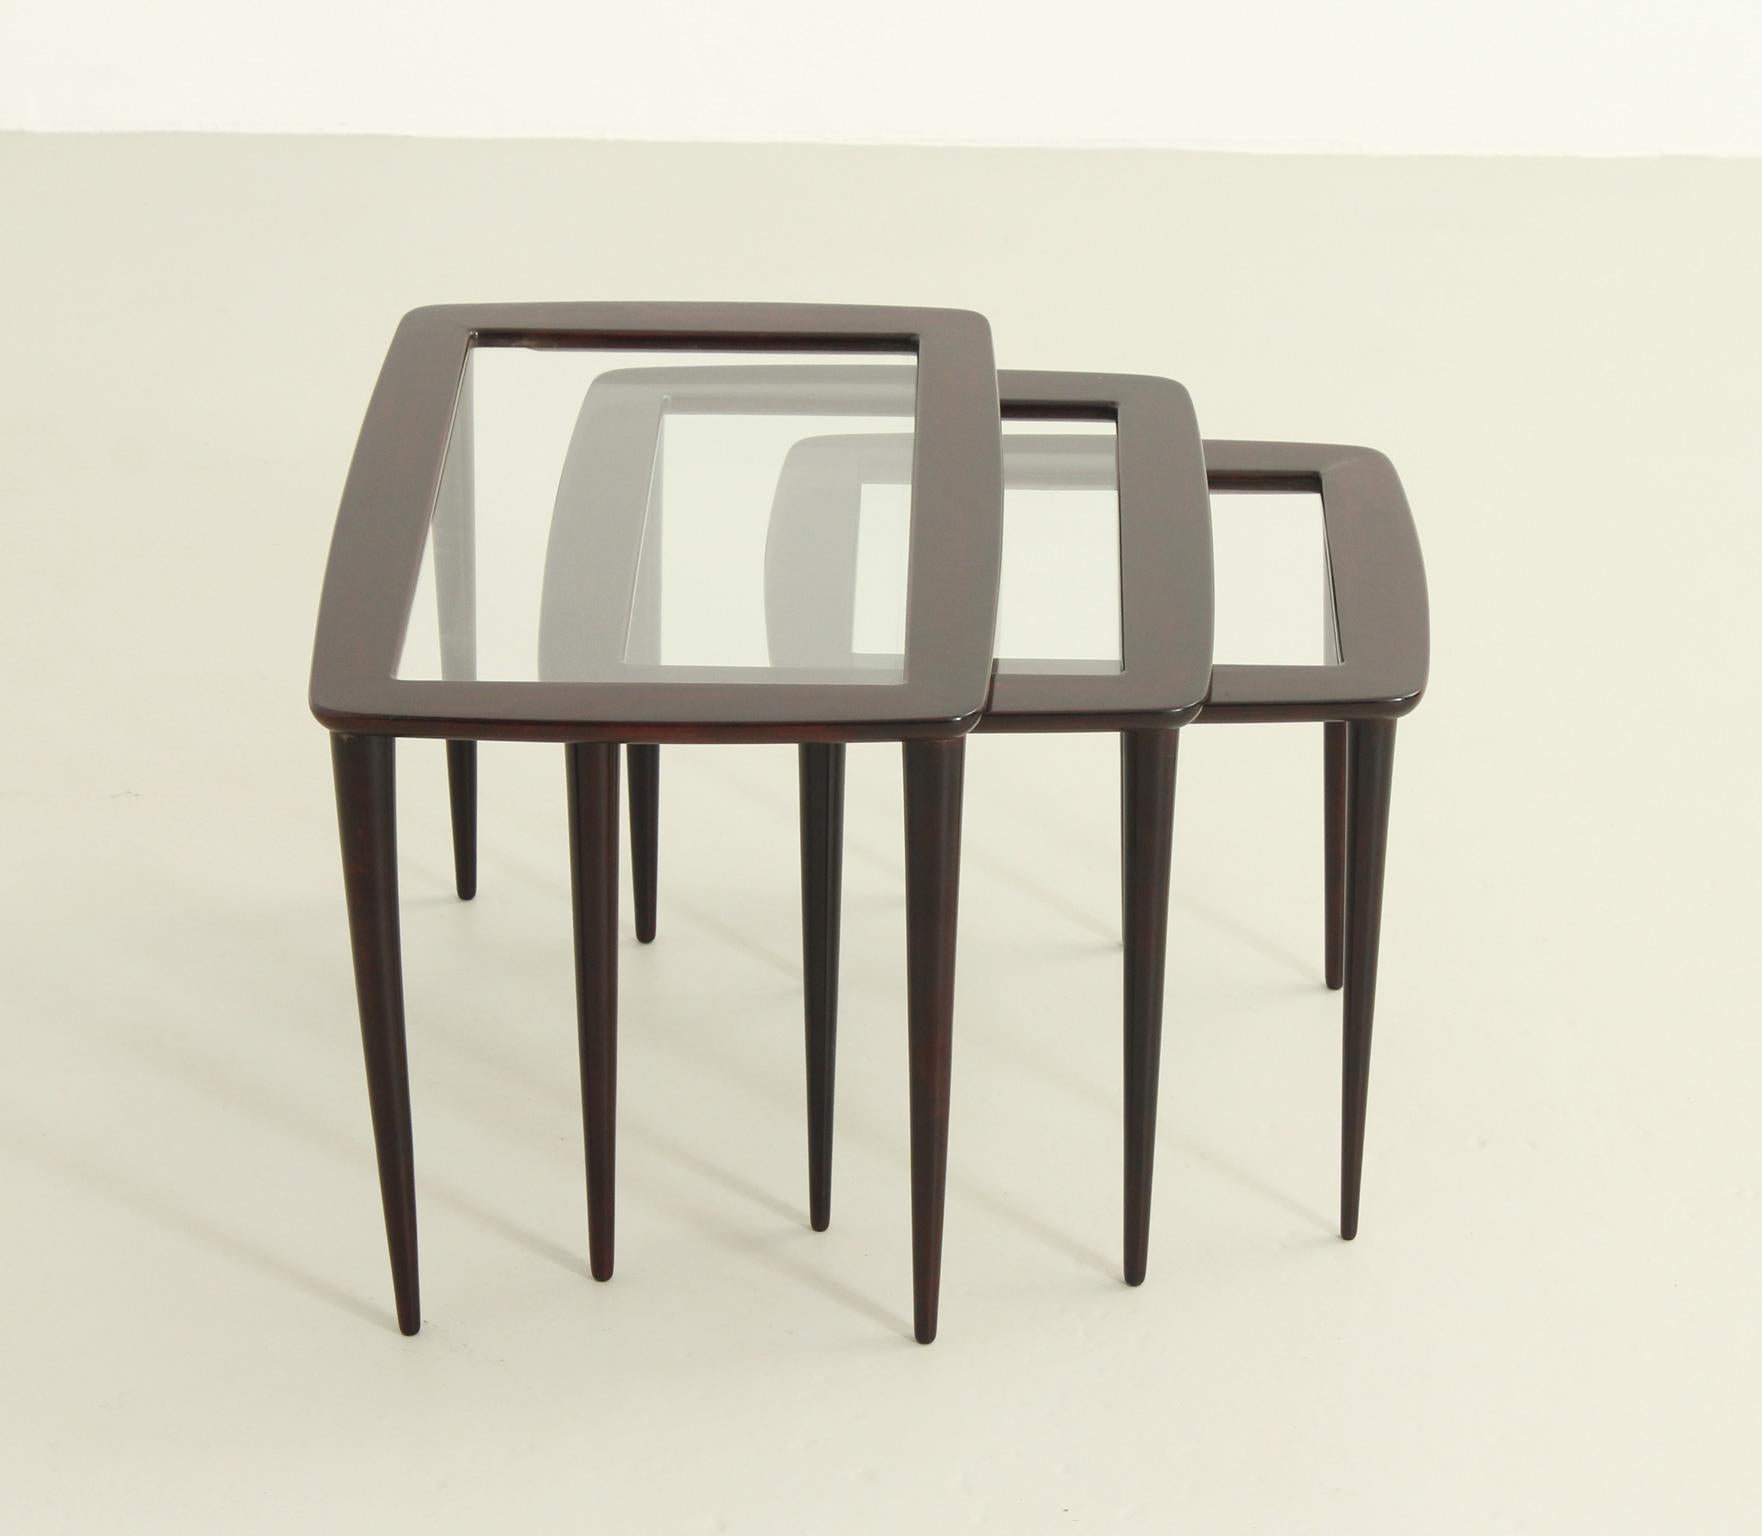 Wood Set of Nesting Tables by Ico Parisi for De Baggis, 1955 For Sale